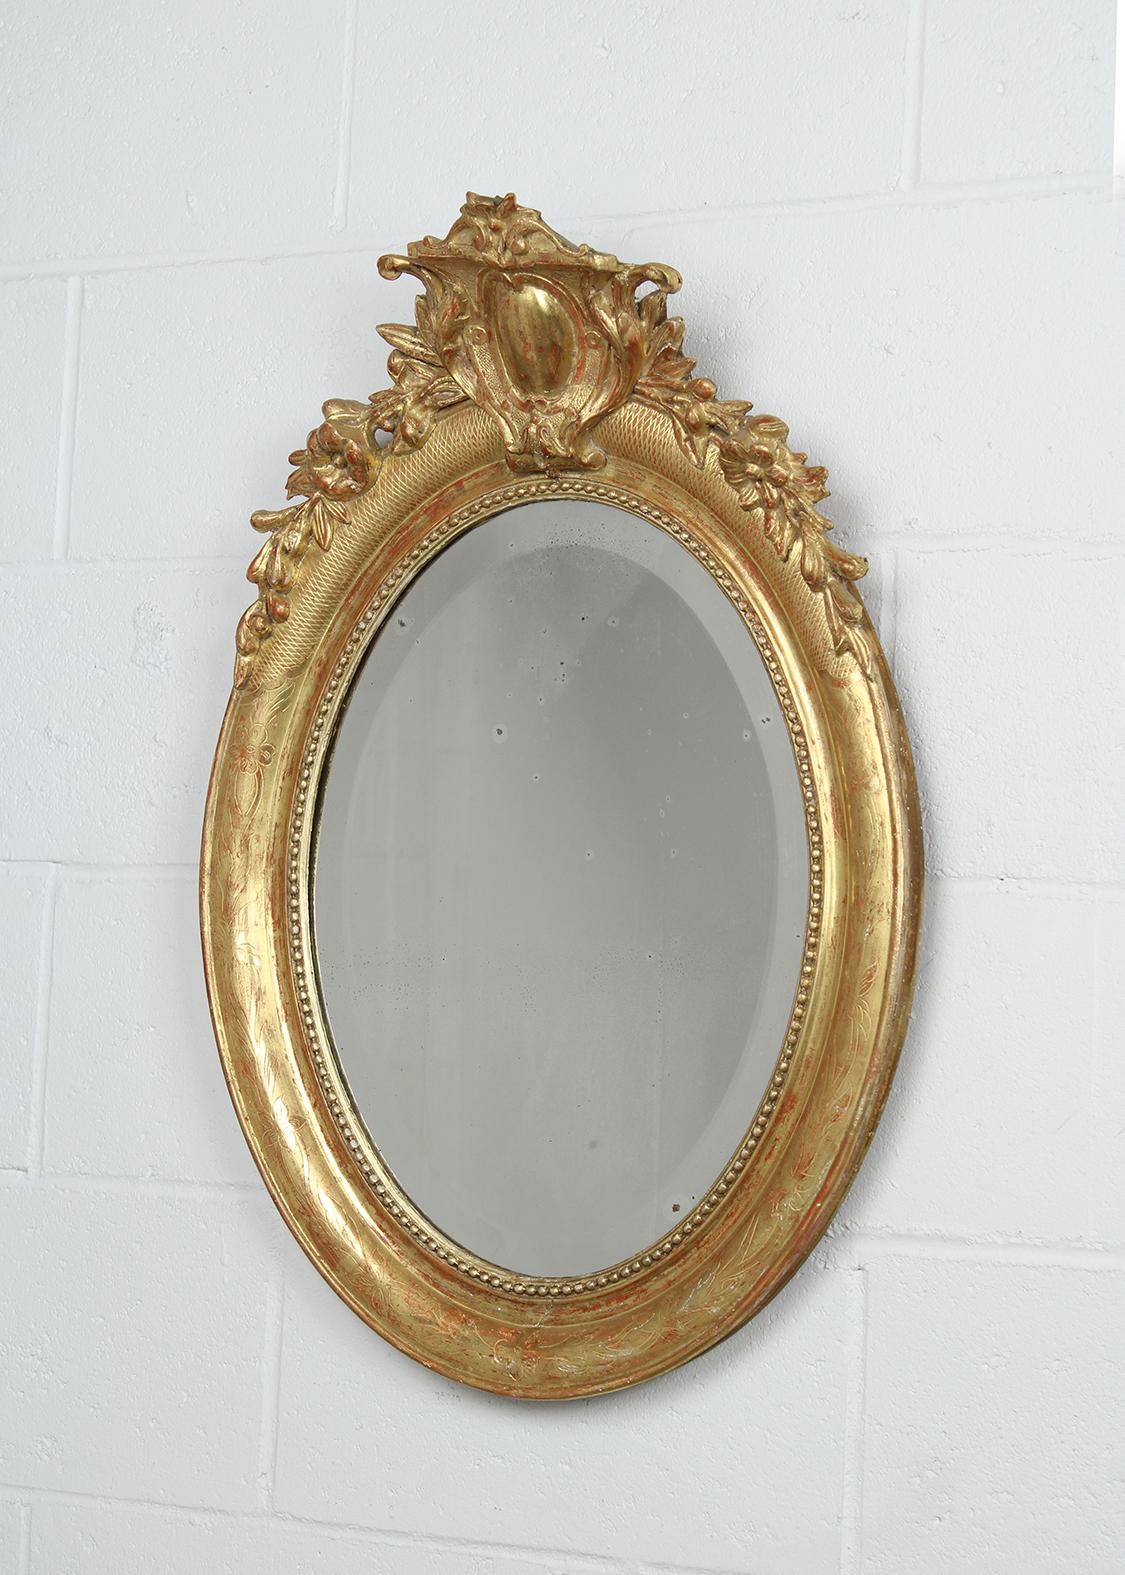 Immerse yourself in the elegance of the 1840s with our French Louis XVI-style gilt oval mirror. The mirror is beautifully framed with intricate floral designs, all meticulously carved and crowned. The water gilt finish further enhances its allure.